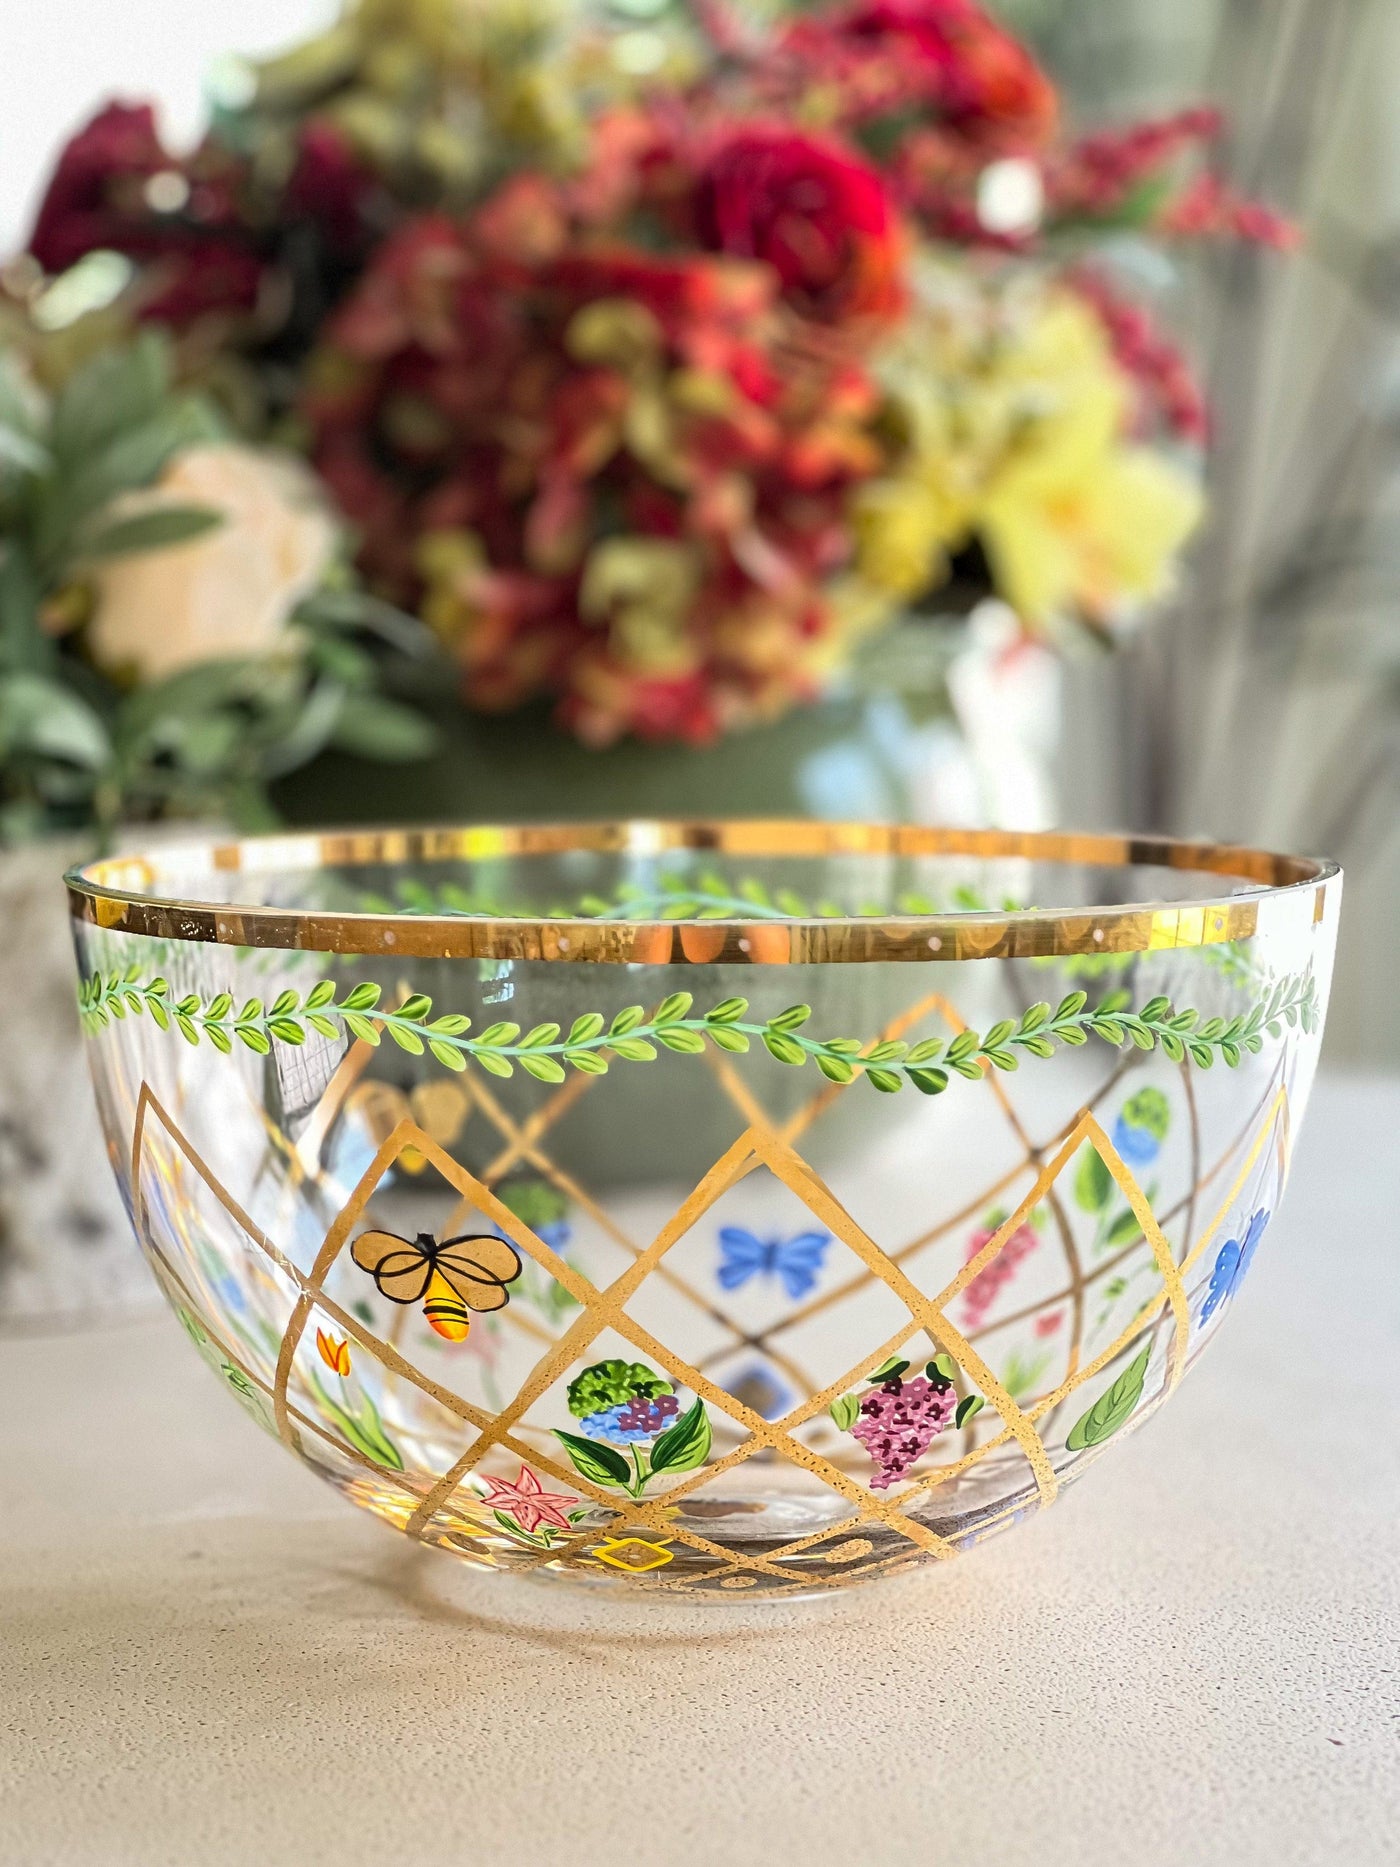 VINTAGE GLASS BOWL WITH HAND-PAINTED FLORALS, BEES & BUTTERFLIES WITH GOLD TRIM BY LENOX Revive In Style Vintage Furniture Painted Refinished Redesign Beautiful One of a Kind Artistic Antique Unique Home Decor Interior Design French Country Shabby Chic Cottage Farmhouse Grandmillenial Coastal Chalk Paint Metallic Glam Eclectic Quality Dovetailed Rustic Furniture Painter Pinterest Bedroom Living Room Entryway Kitchen Home Trends House Styles Decorating ideas